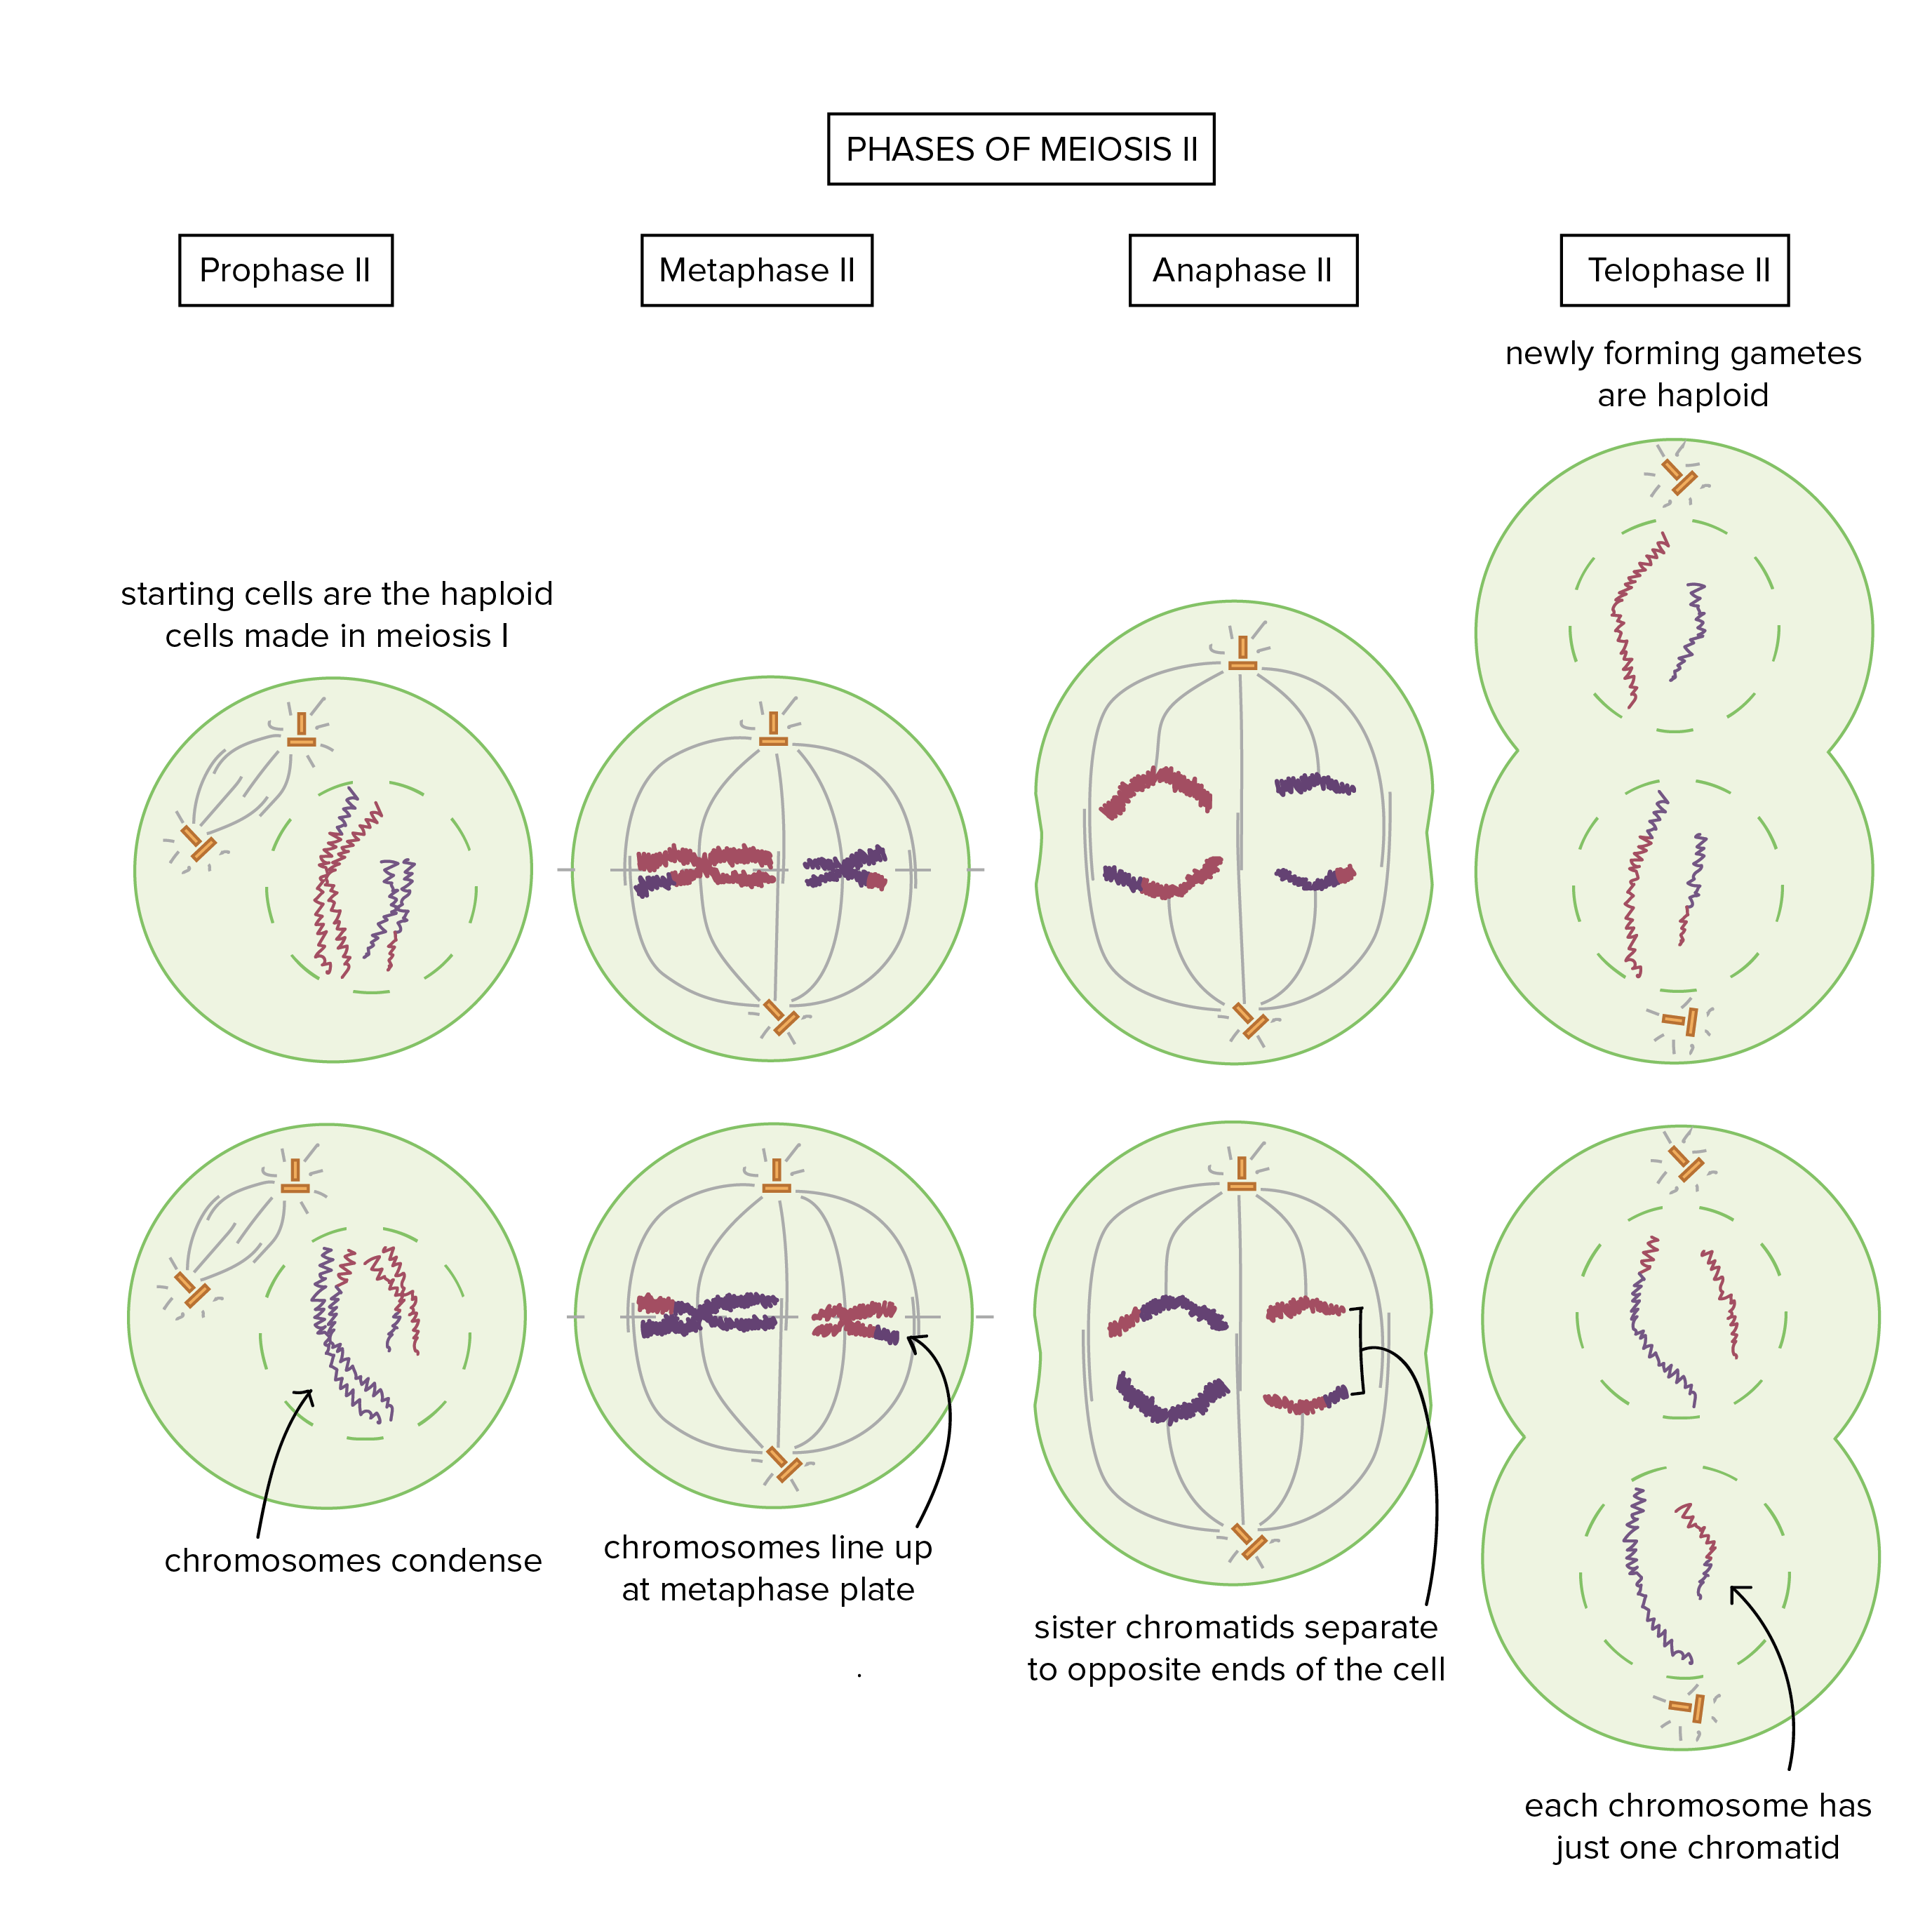 Meiosis stages